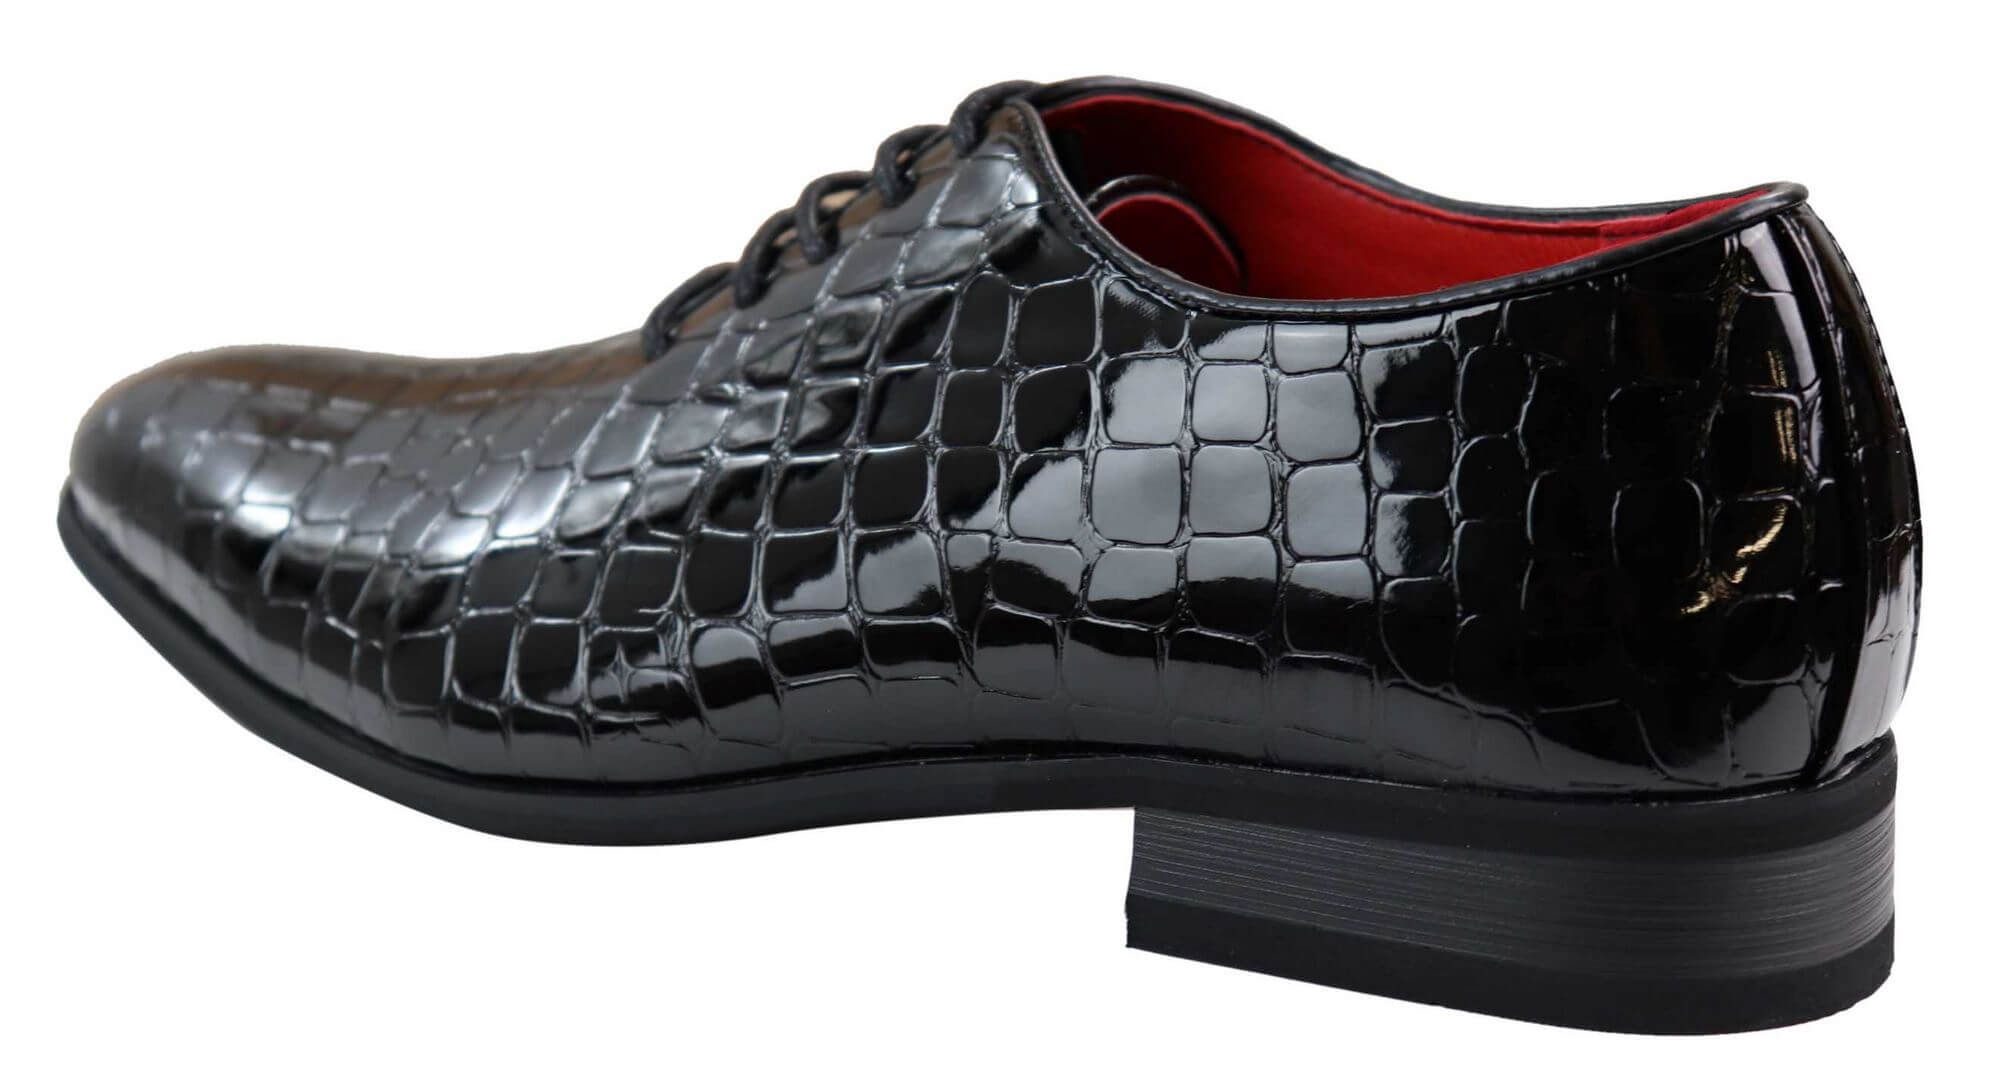 Mens Patent Black Crocodile Style PU Leather Shoes: Buy Online - Happy ...